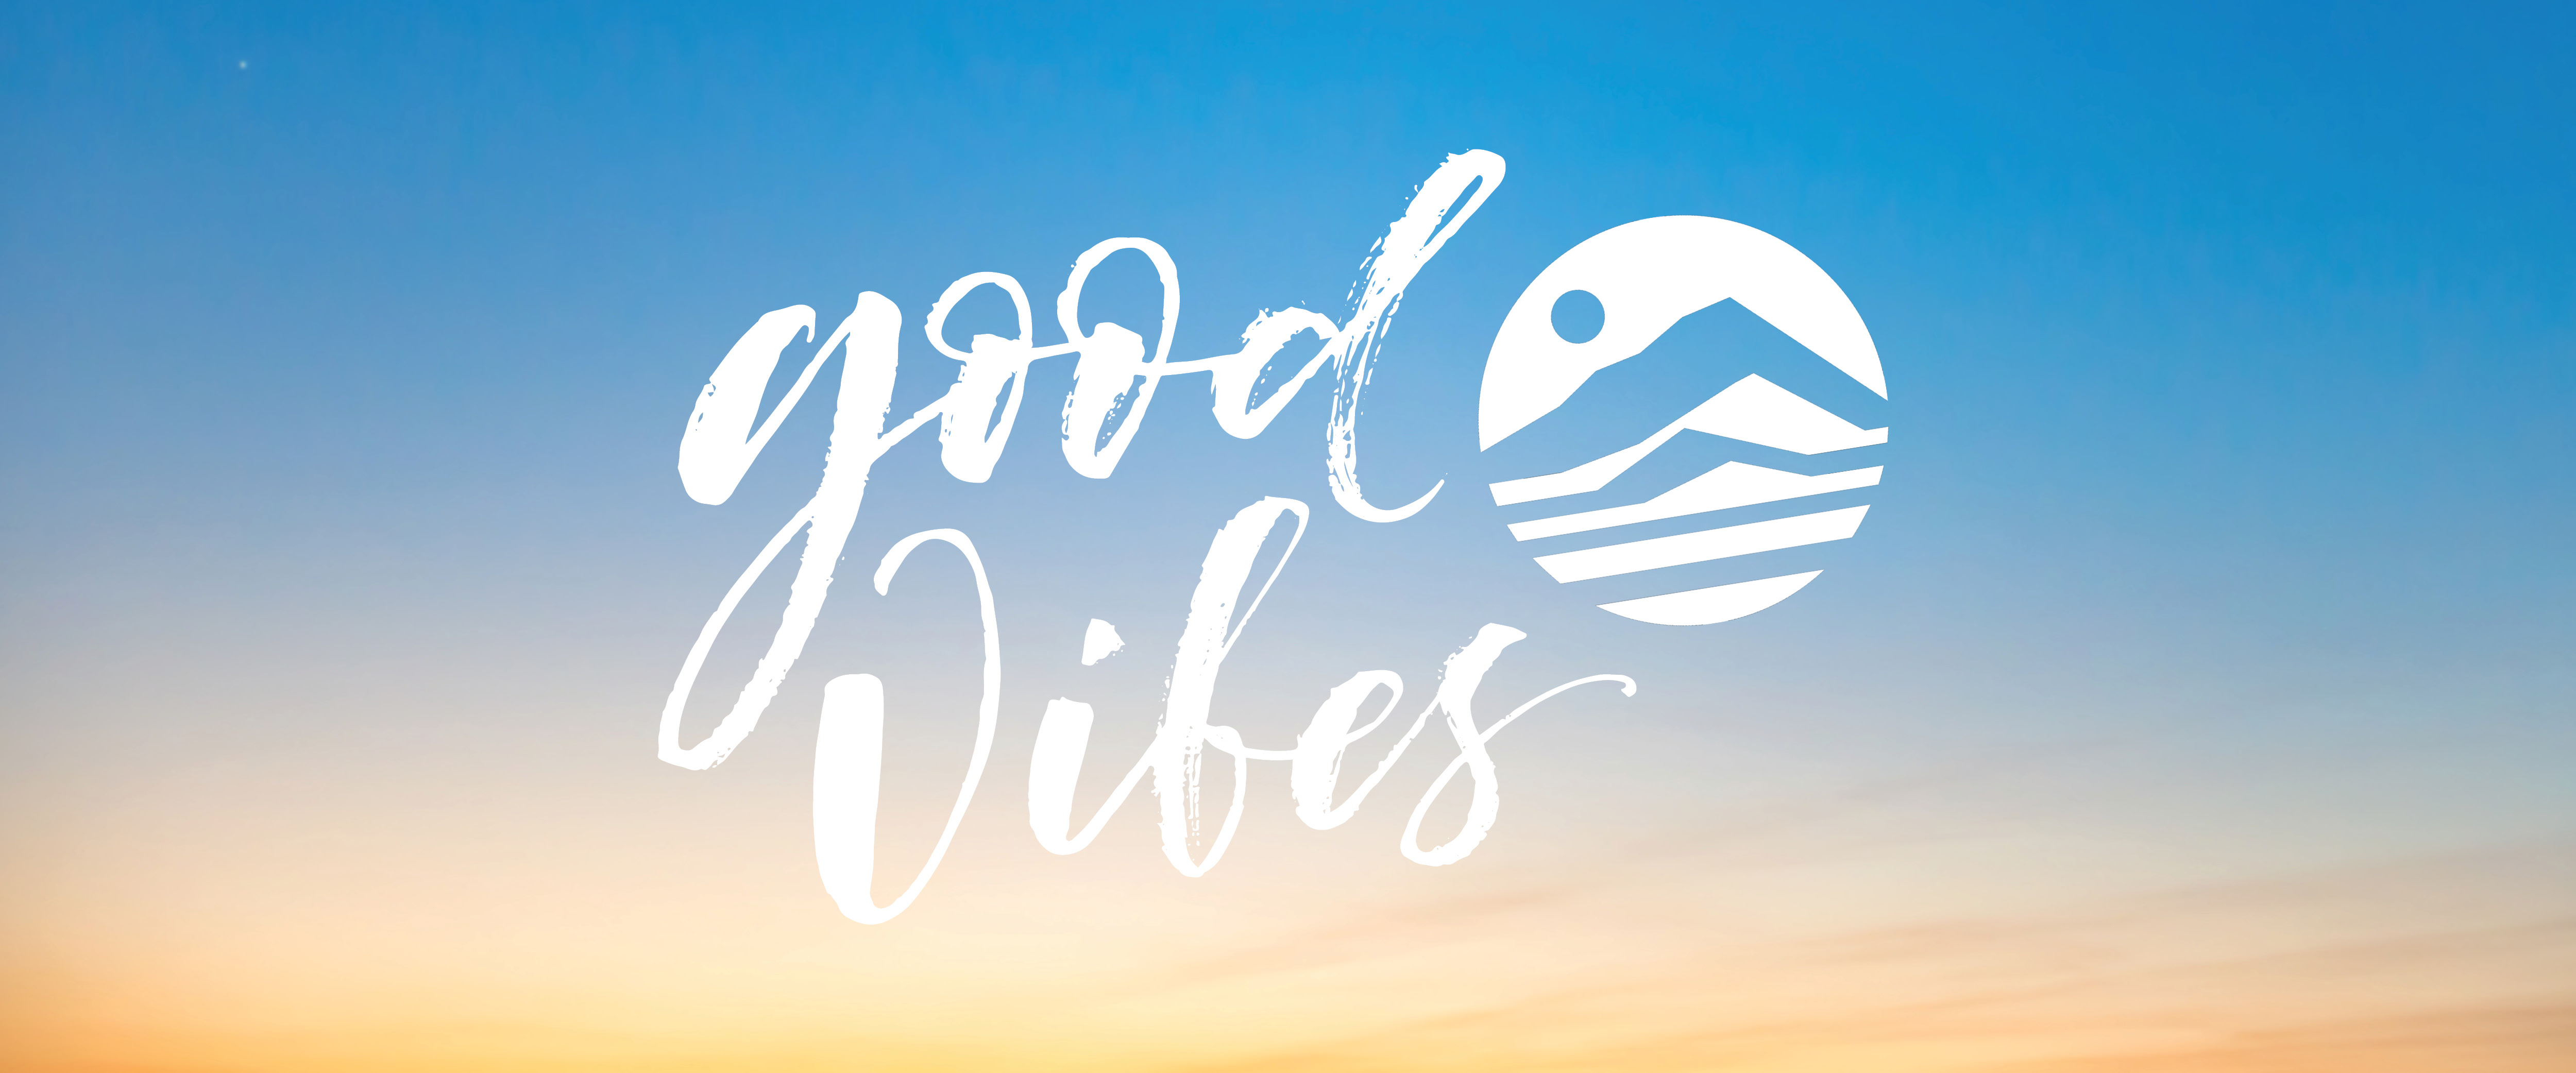 " Good vibes" or testimonies from members at The Alaska Club